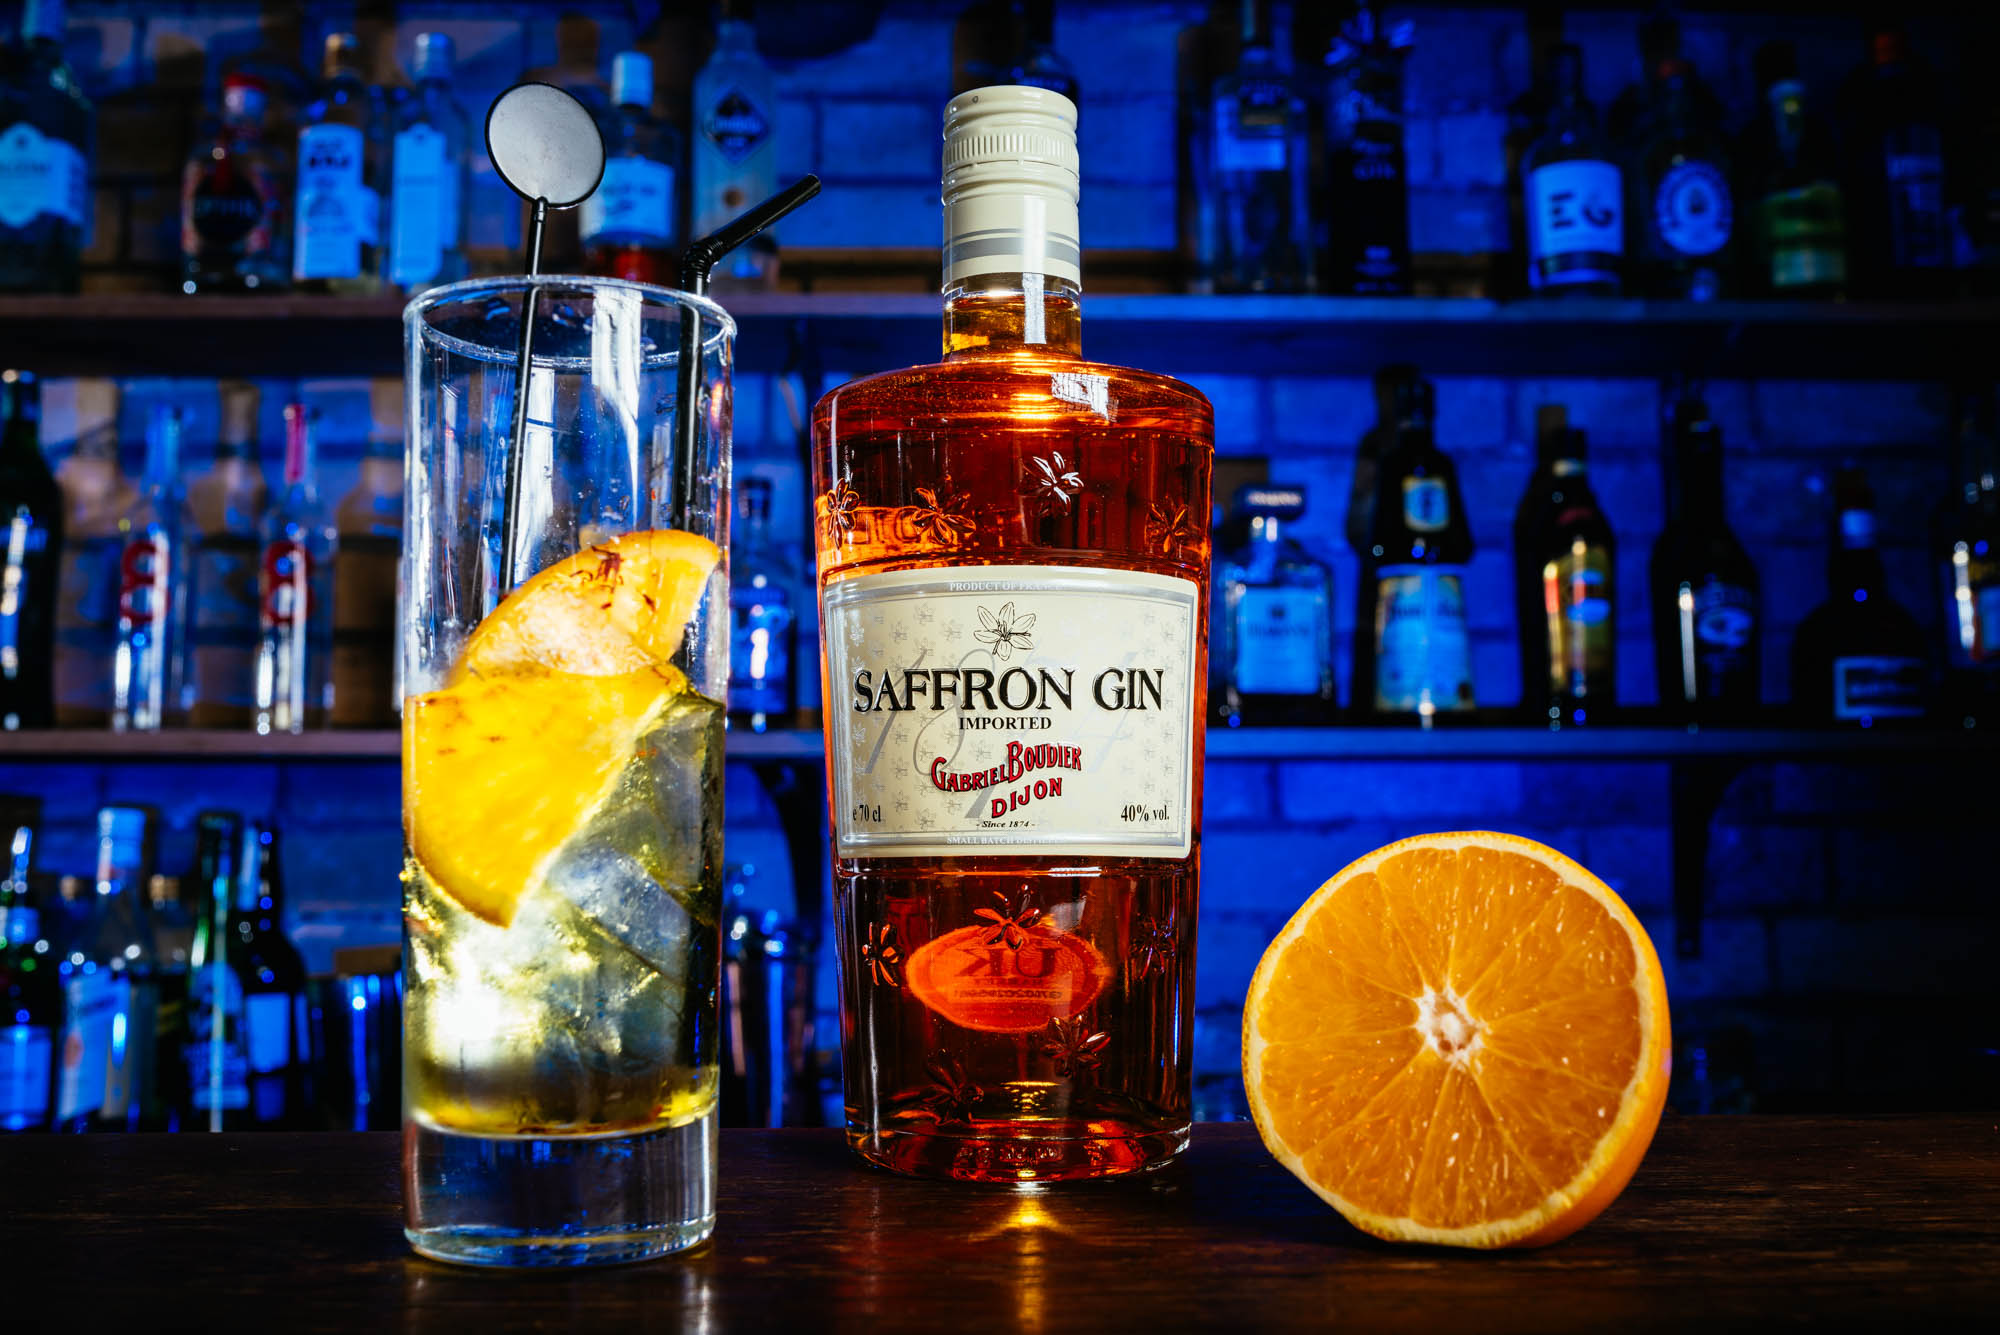 A photo of a bottle of saffron gin with a glass and a sliced orange in front of a blue lit bar